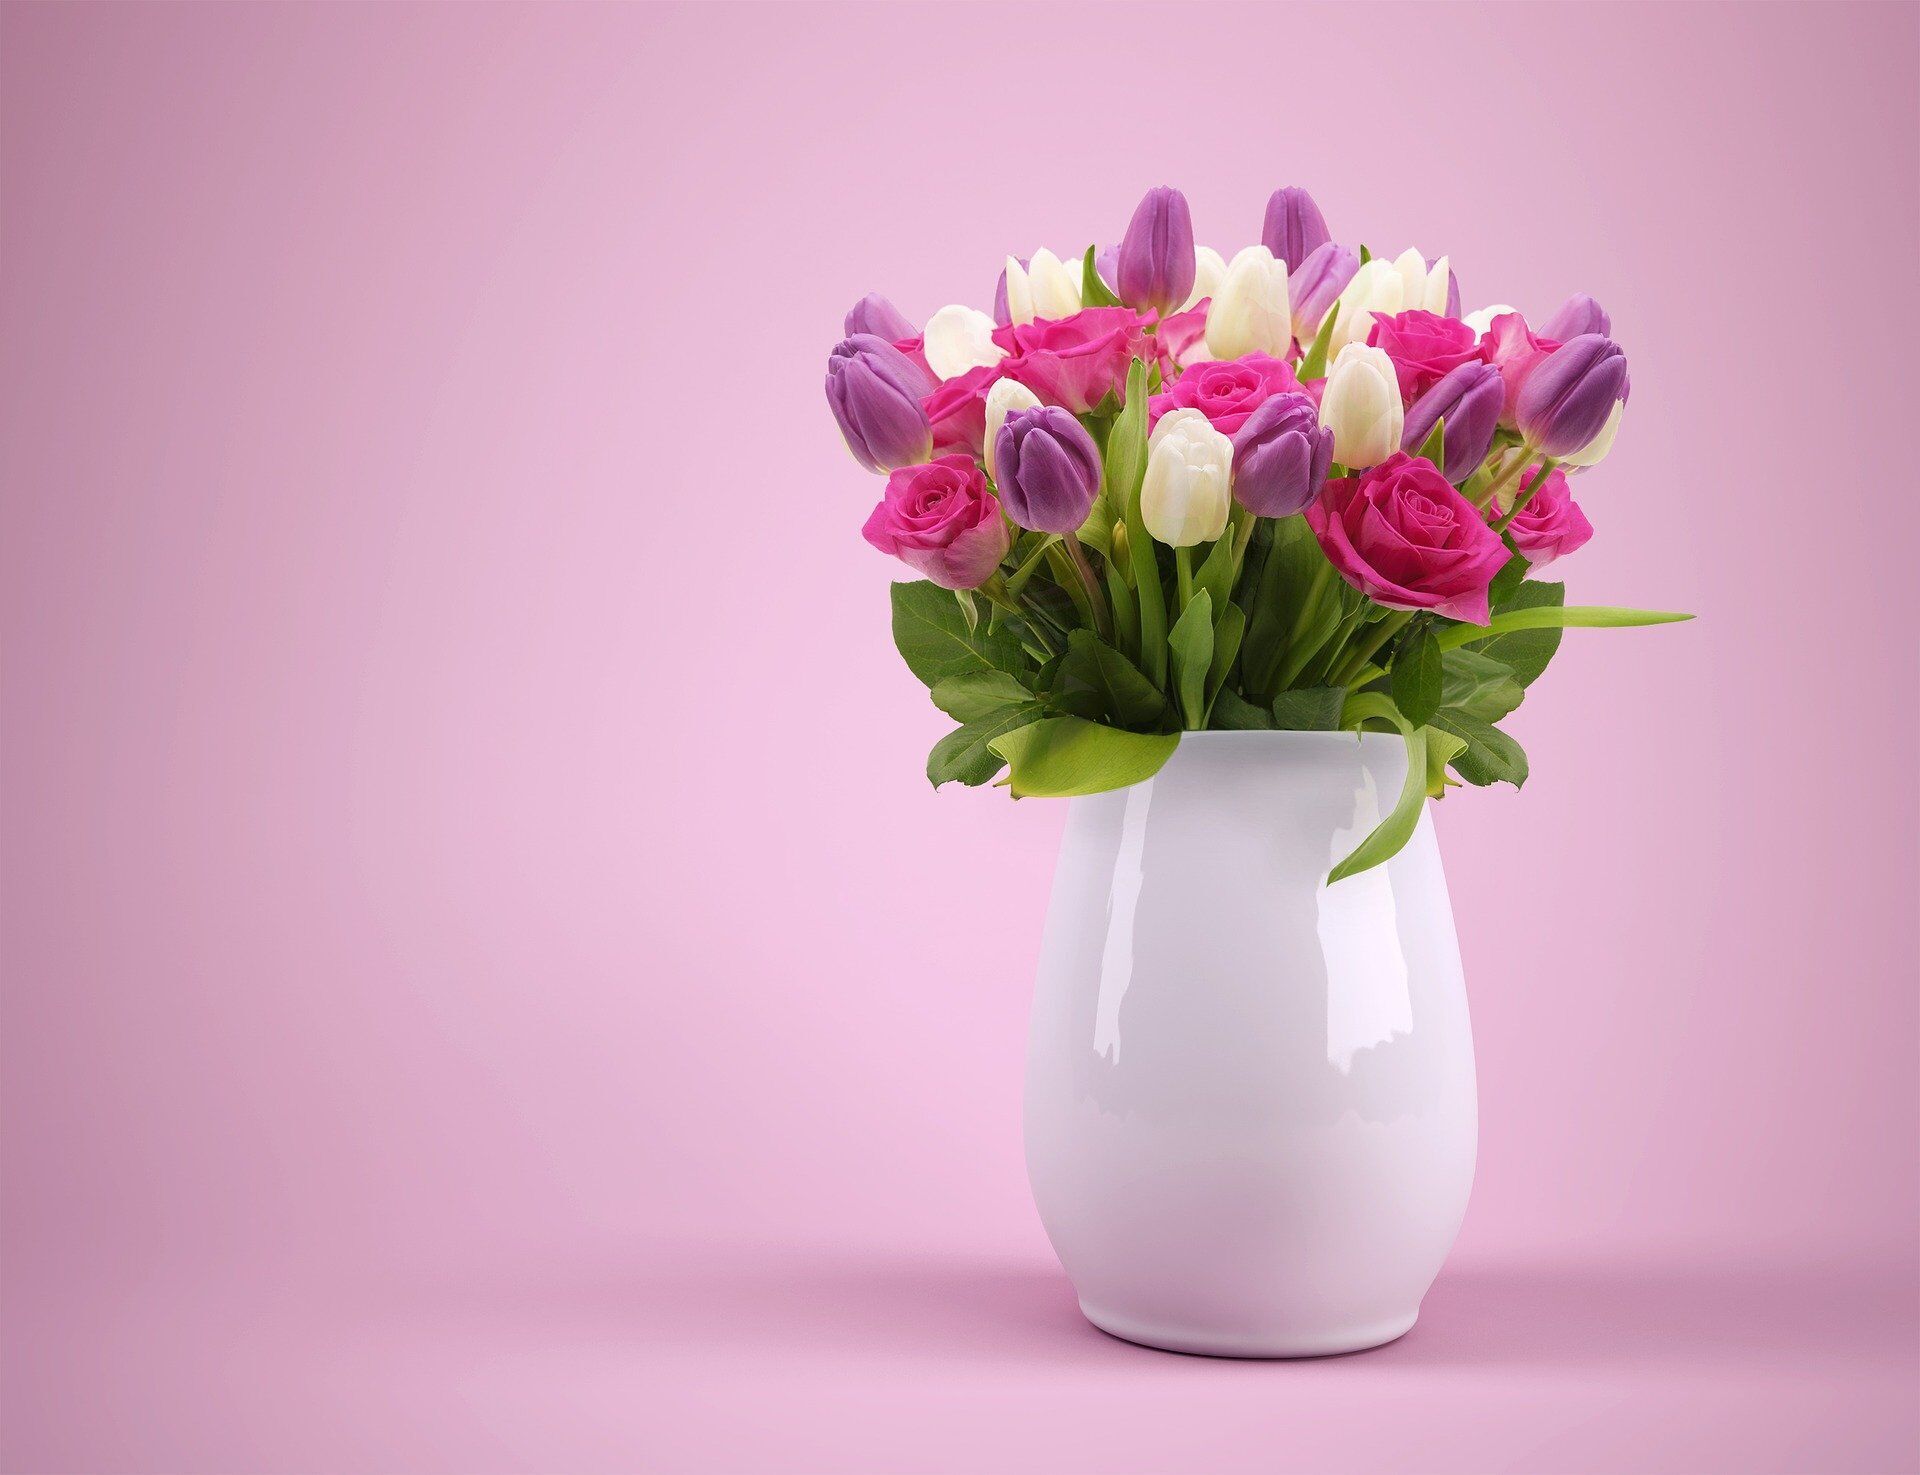 Tulips cause vomiting and hypersalivation